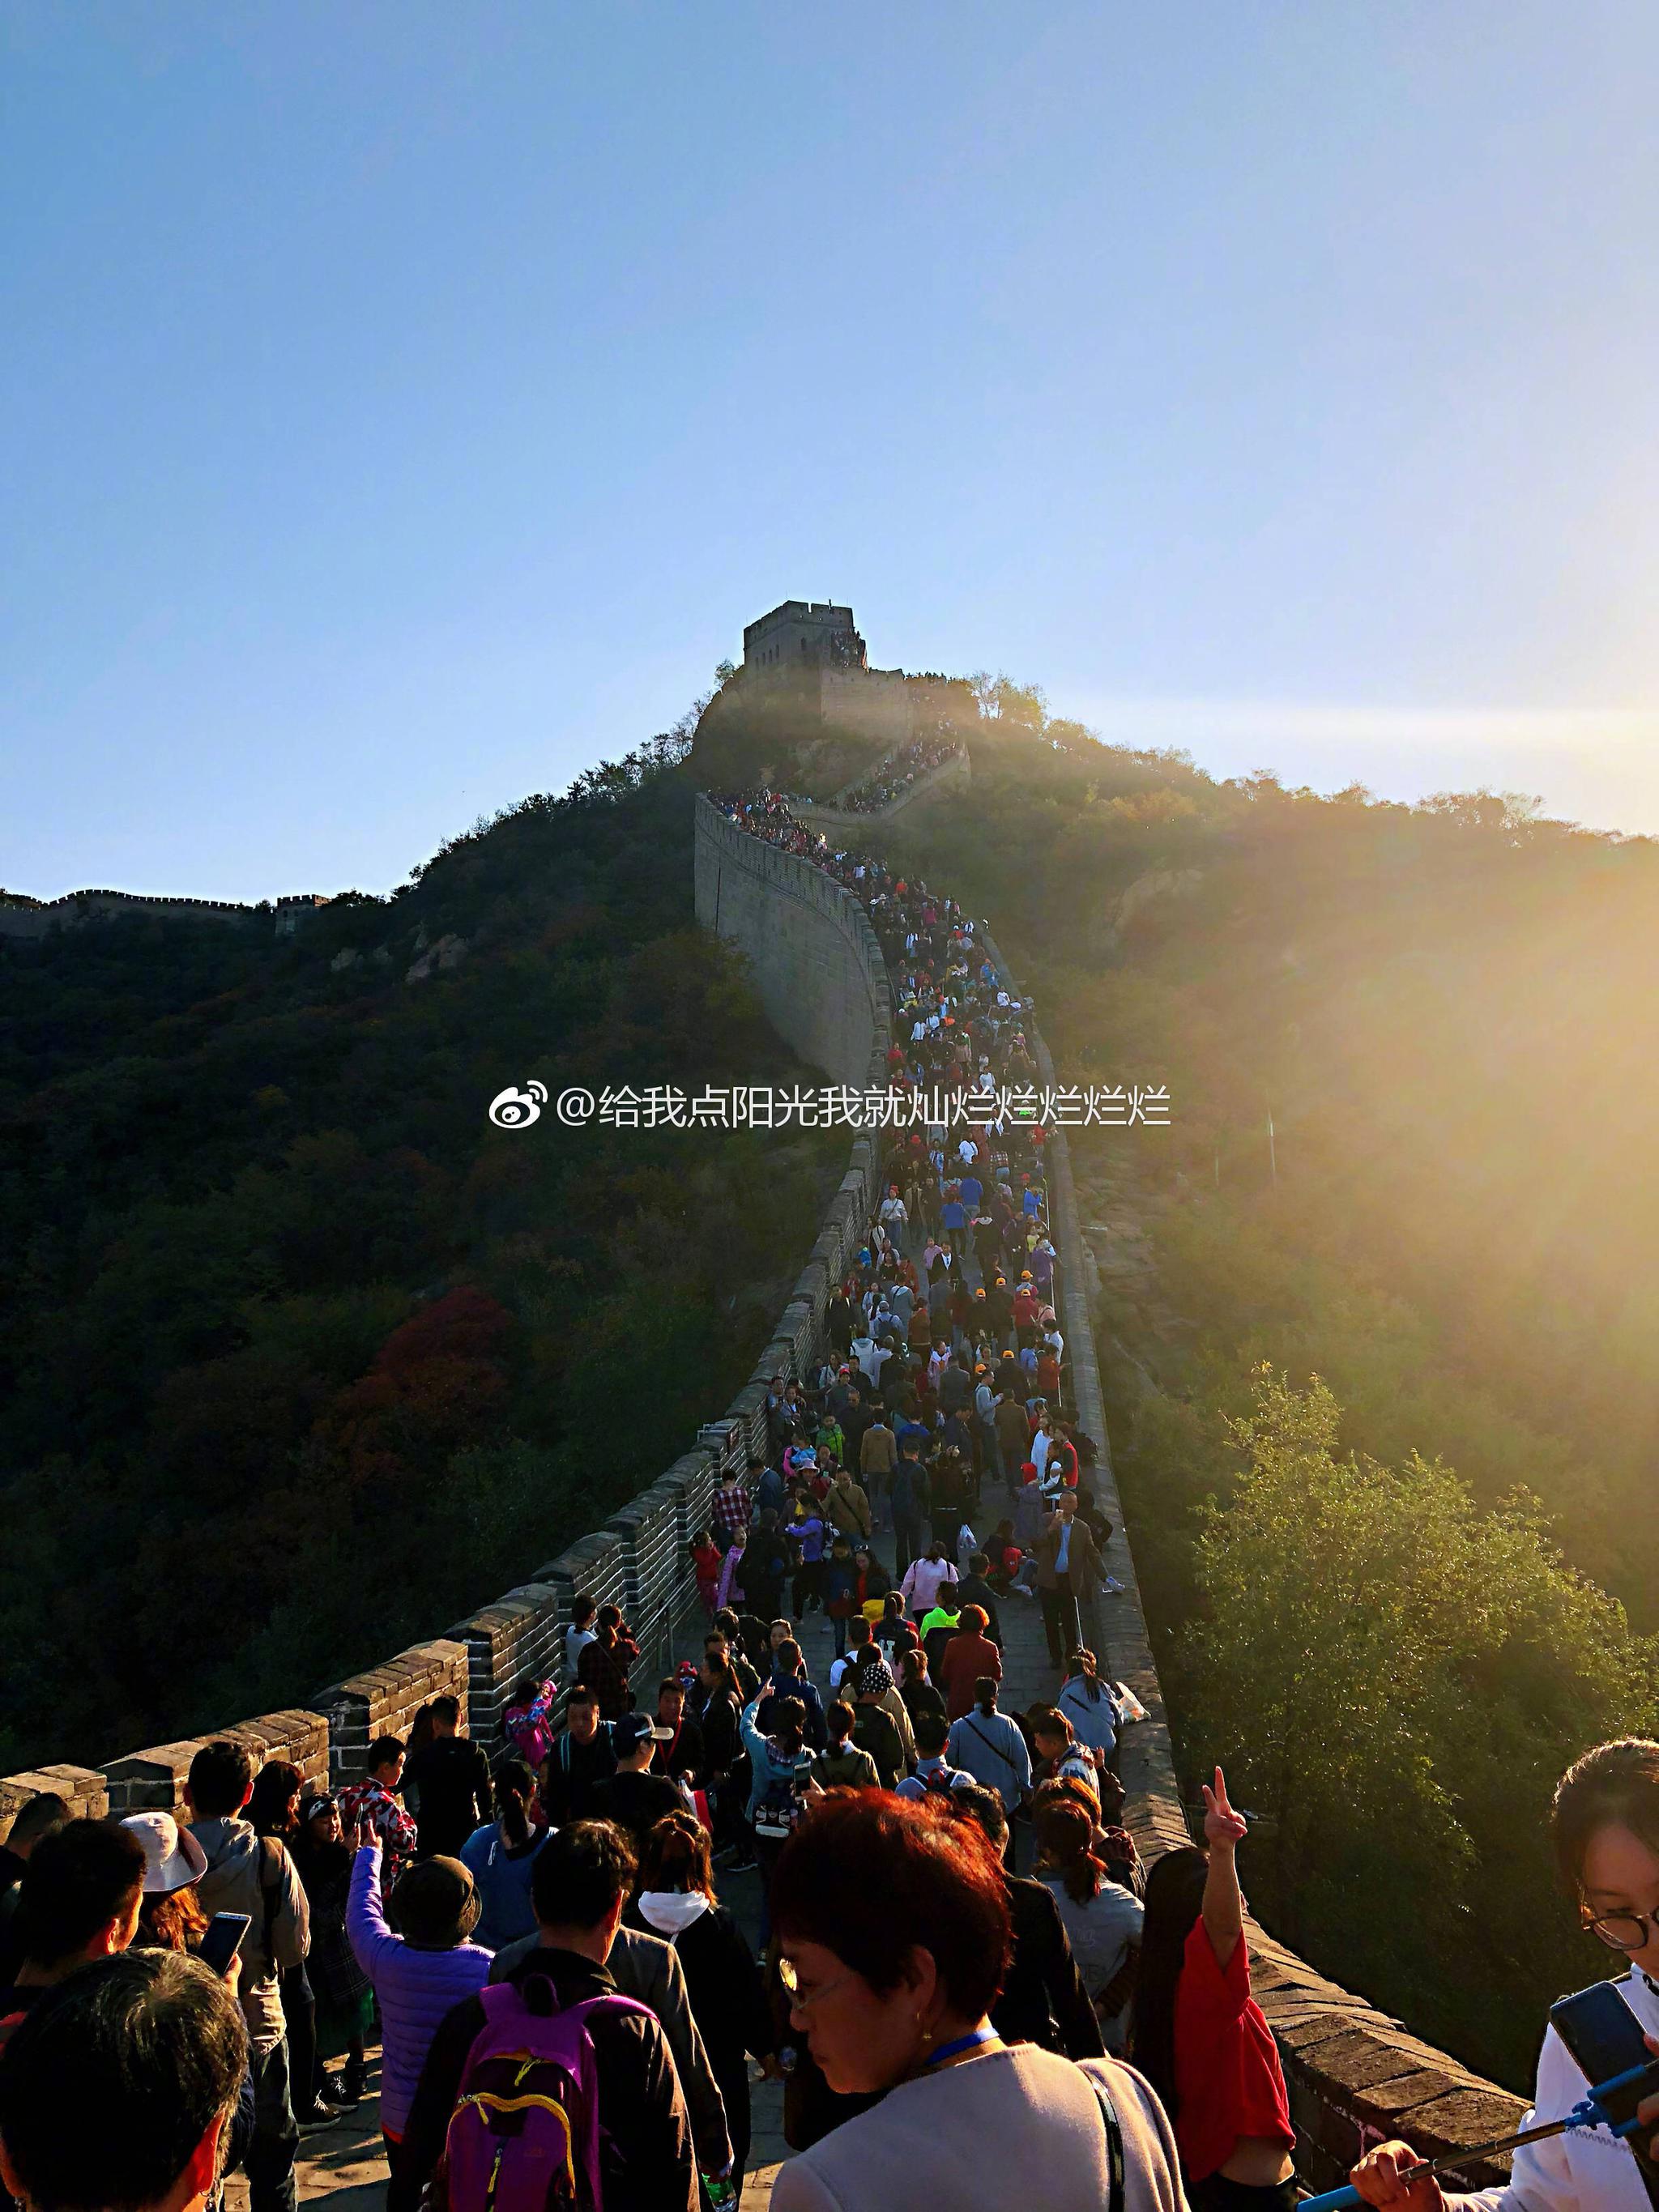 est100 一些攝影(some photos): Great Wall of China, 長城